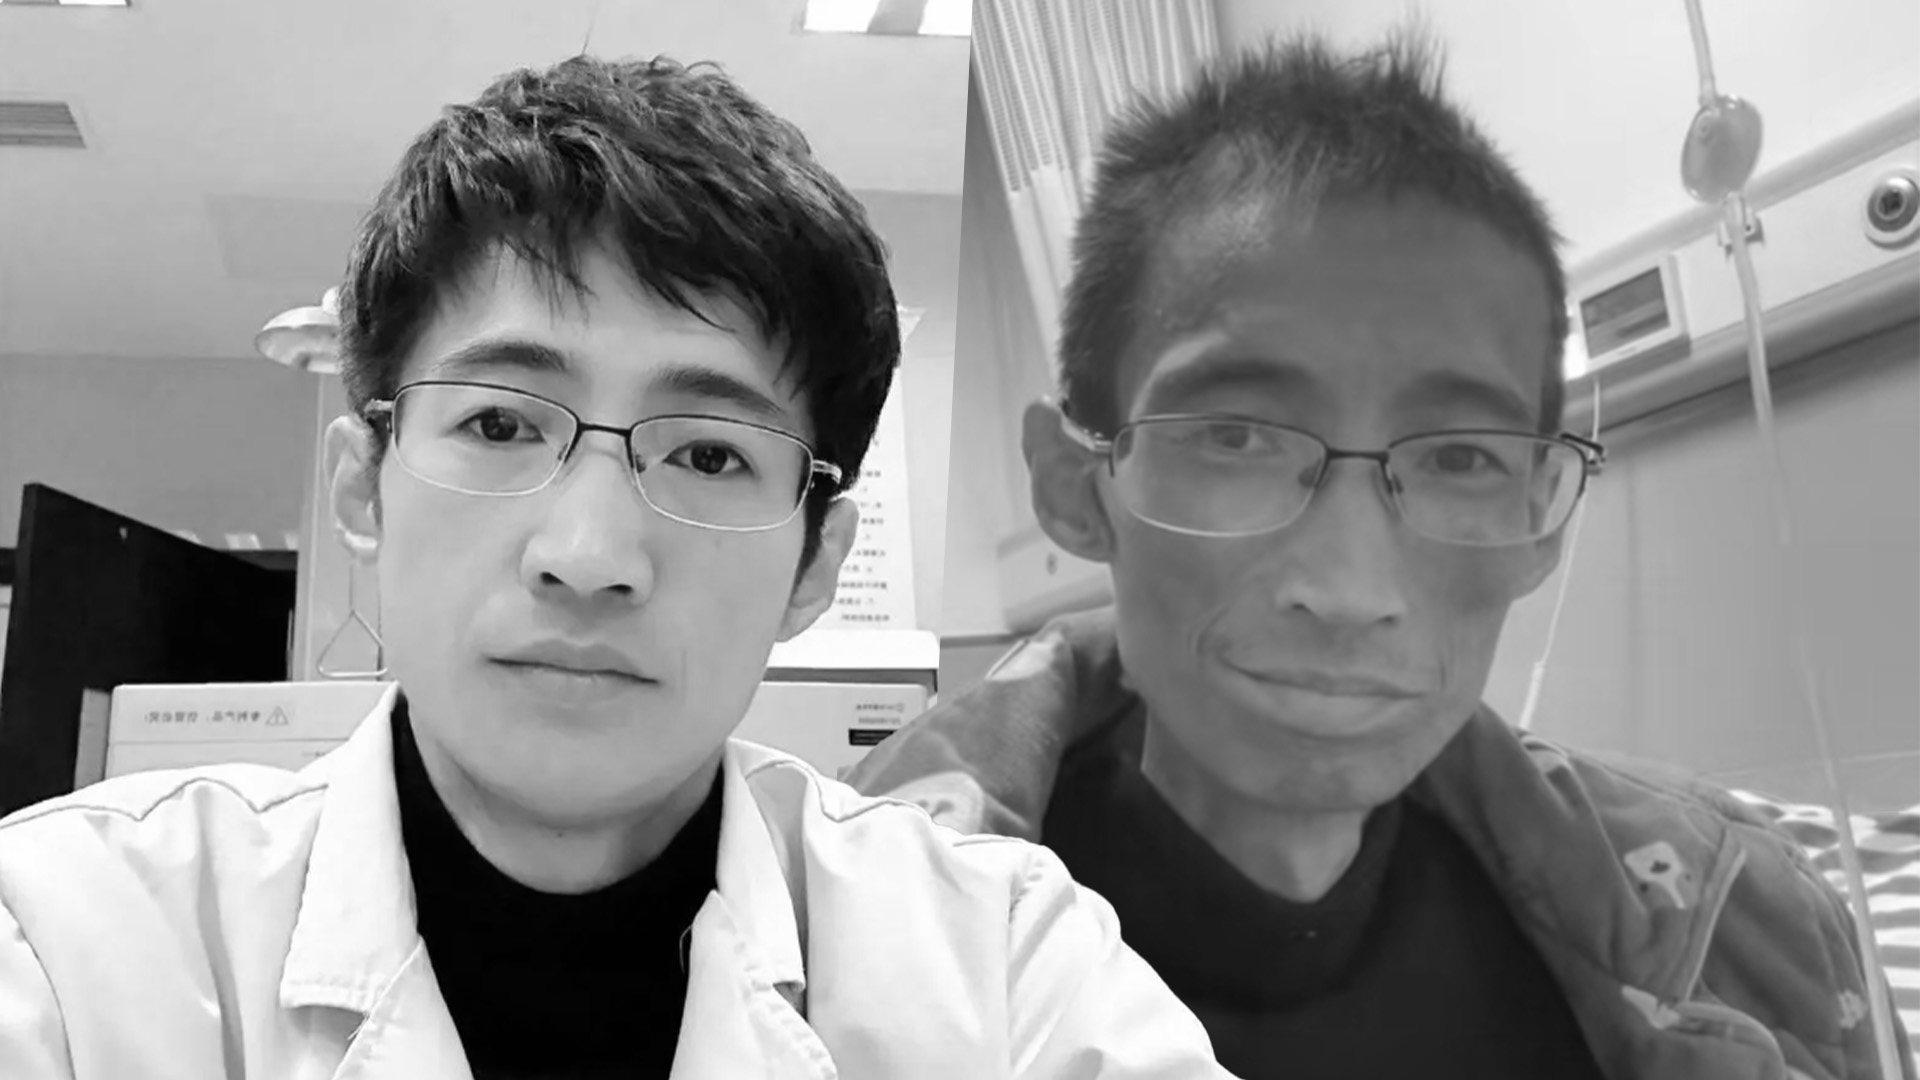 A resilient Chinese doctor who passed away recently battled cancer for four years without ever thought of giving up, inspiring many with his story. Photo: SCMP composite/Douyin